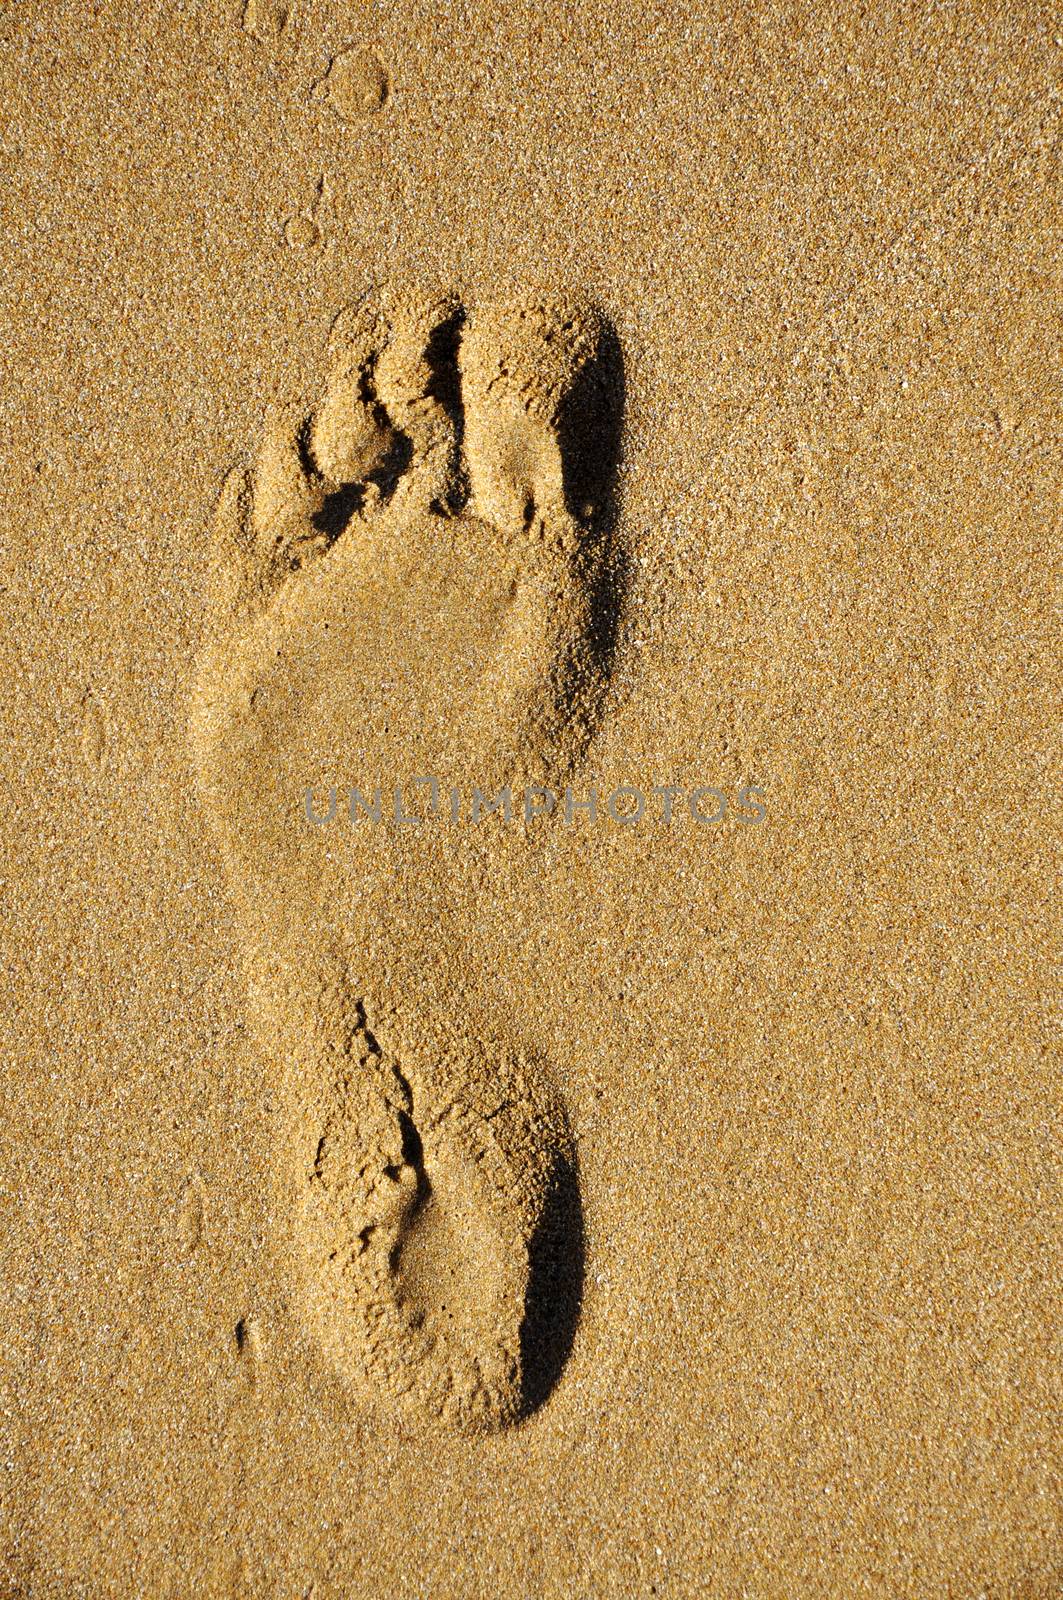 Footprints in the sand by mixeey